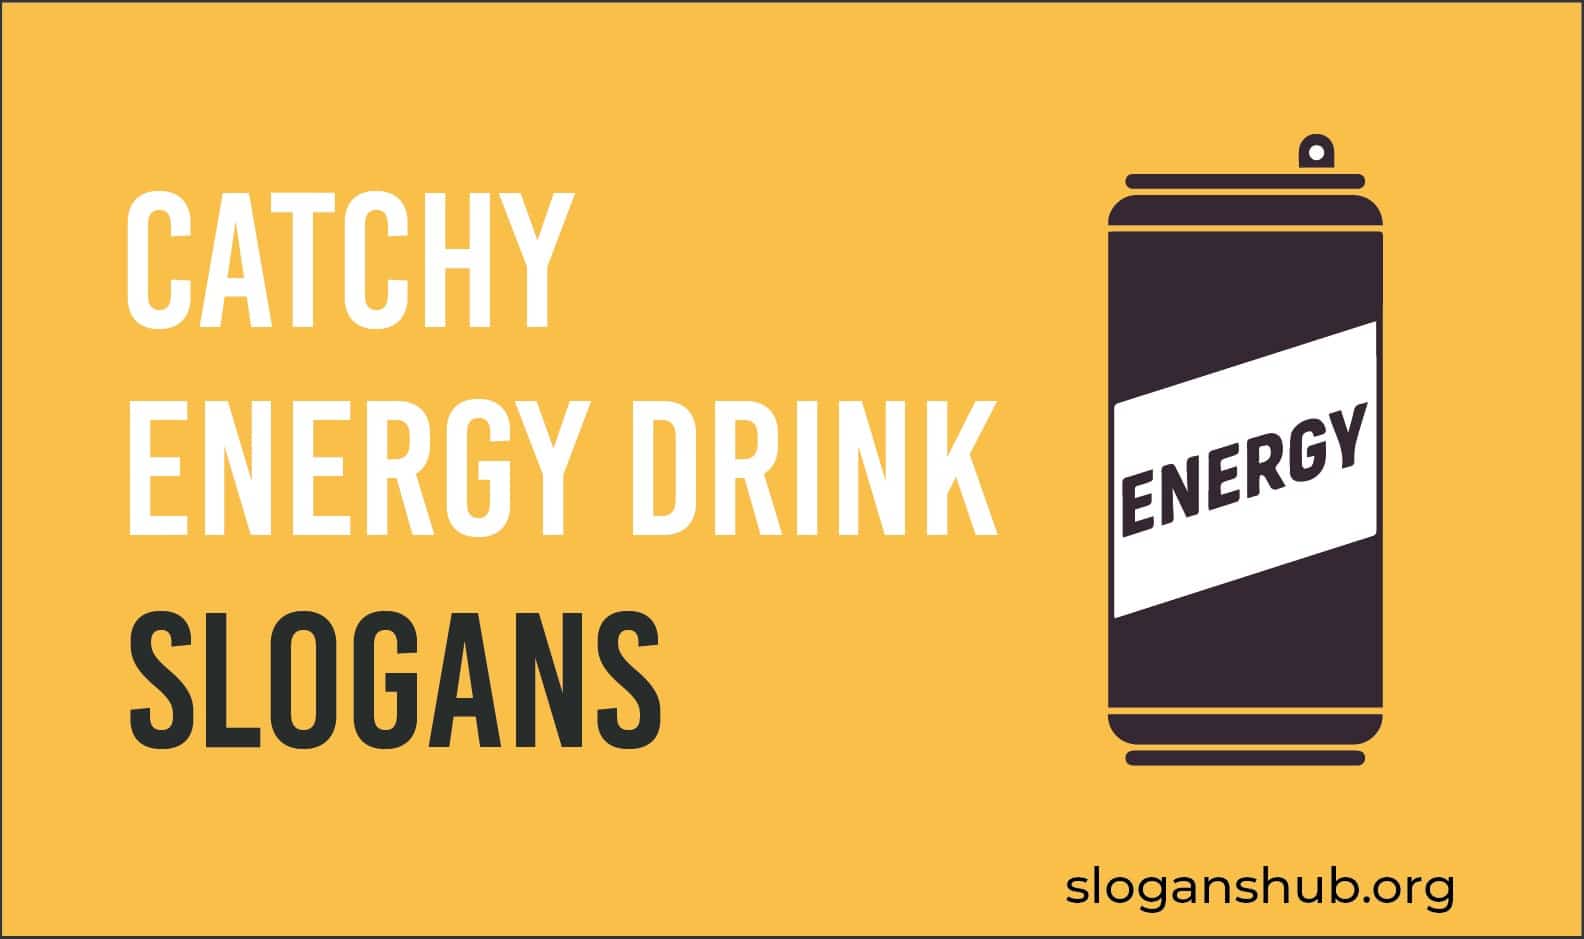 67 Catchy Energy Drink Slogans And Taglines Slogans Hub | CLOOBX HOT GIRL